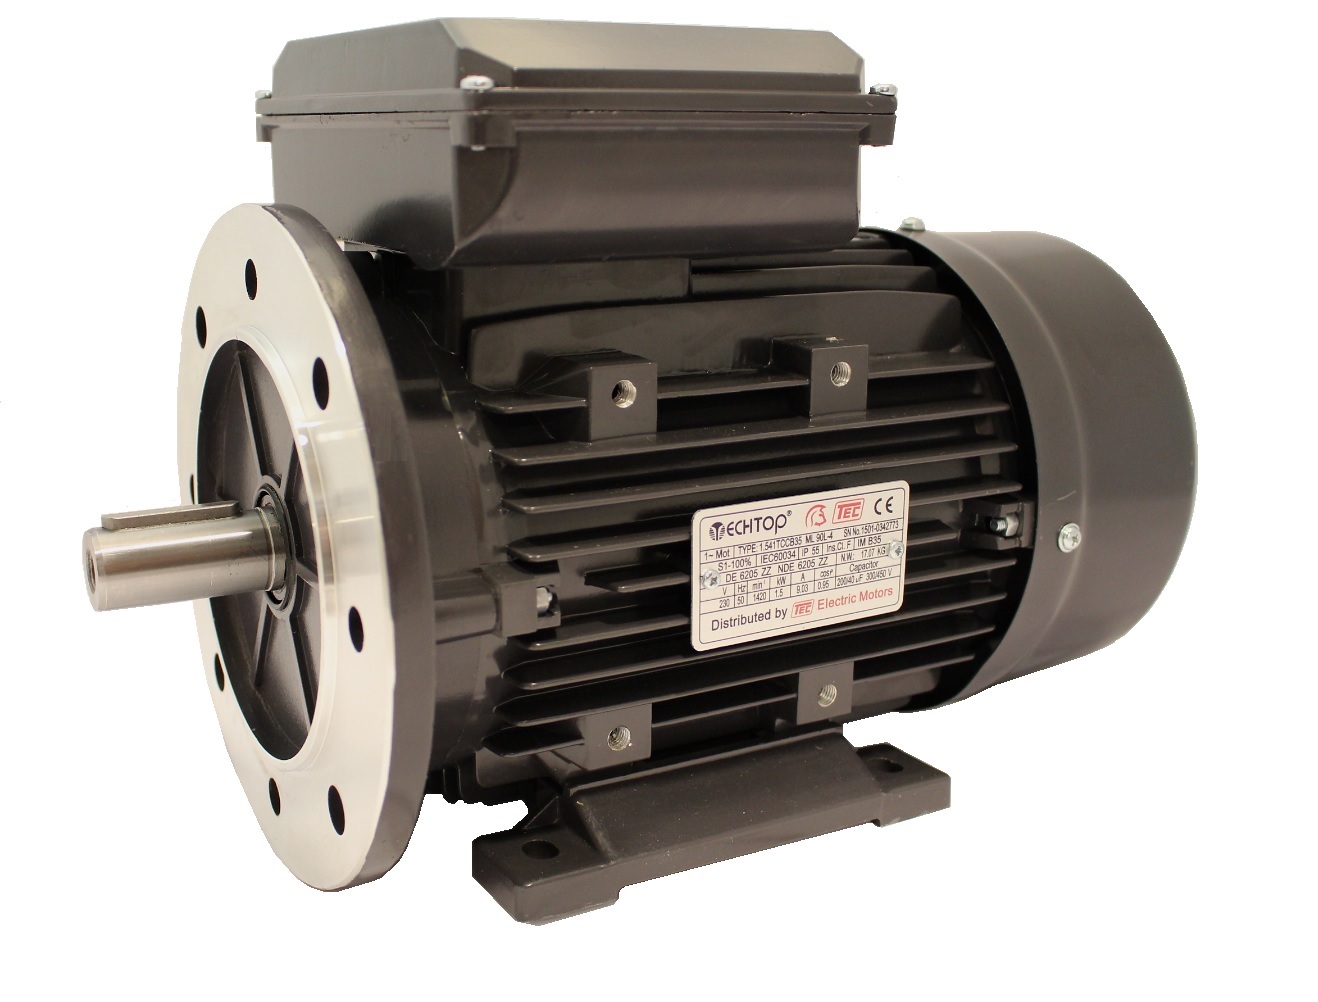 Single Phase 110v Electric Motor, 2.2Kw 2 pole 2850rpm with flange and foot mount